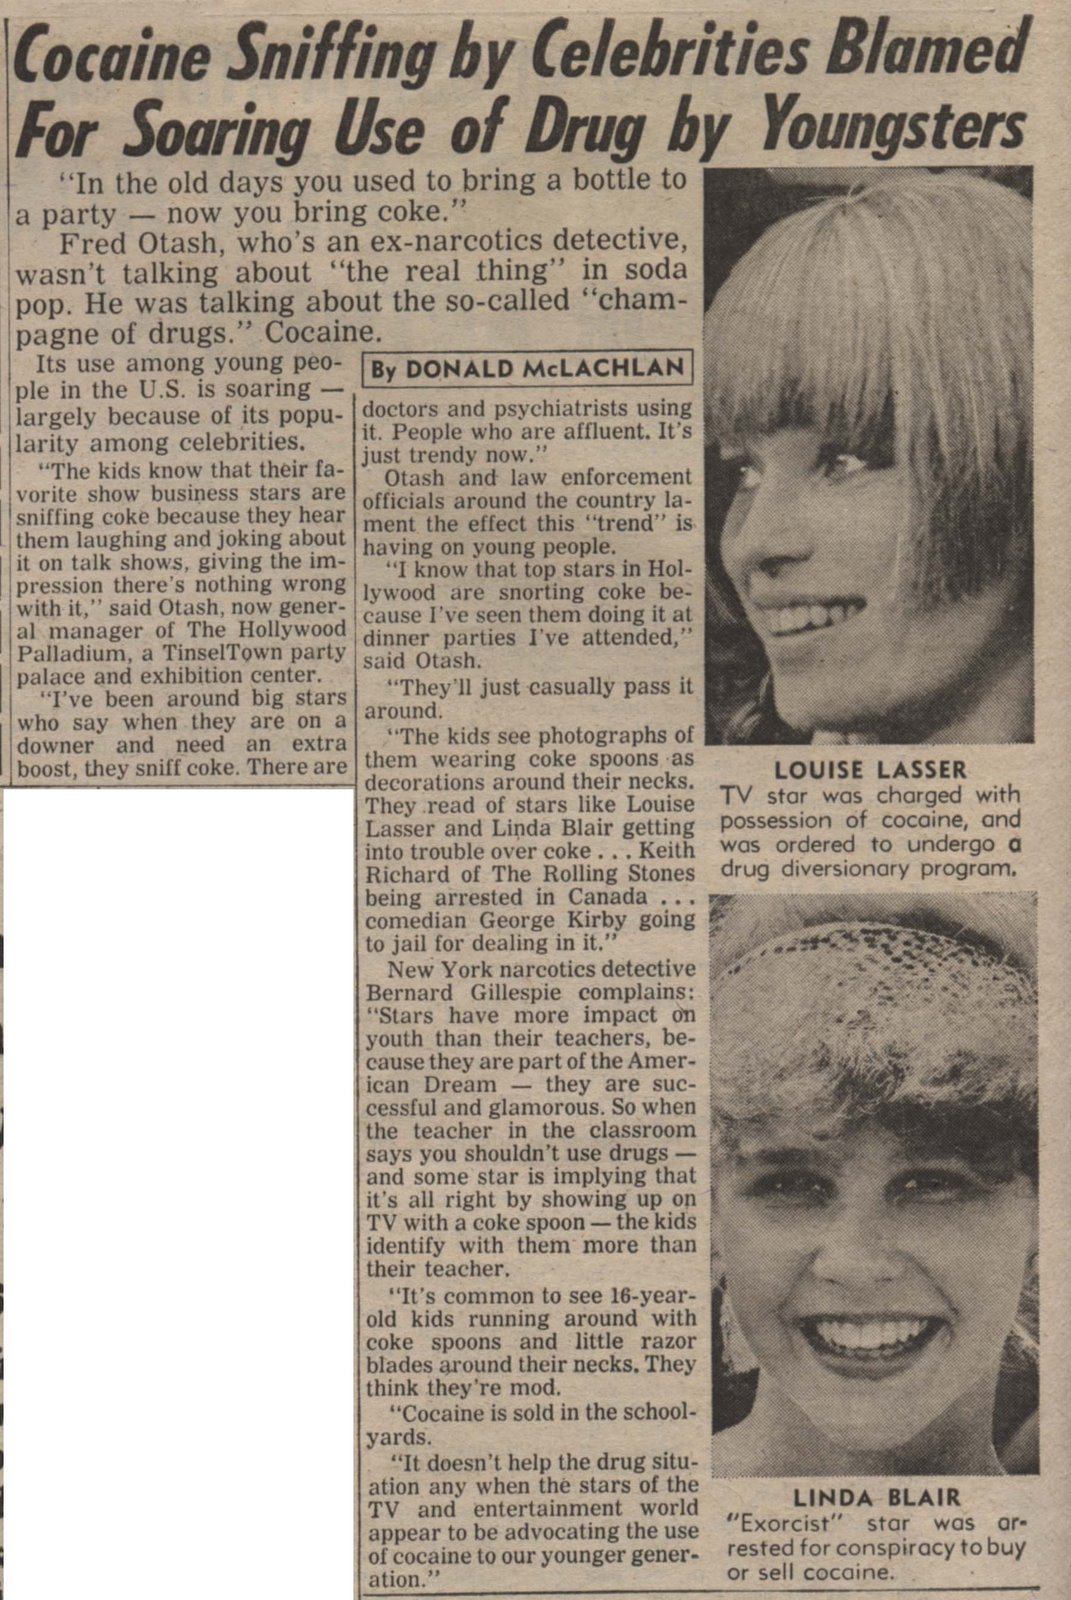 cocaine-sniffing-celebrities-1979-enquirer-747620.jpg